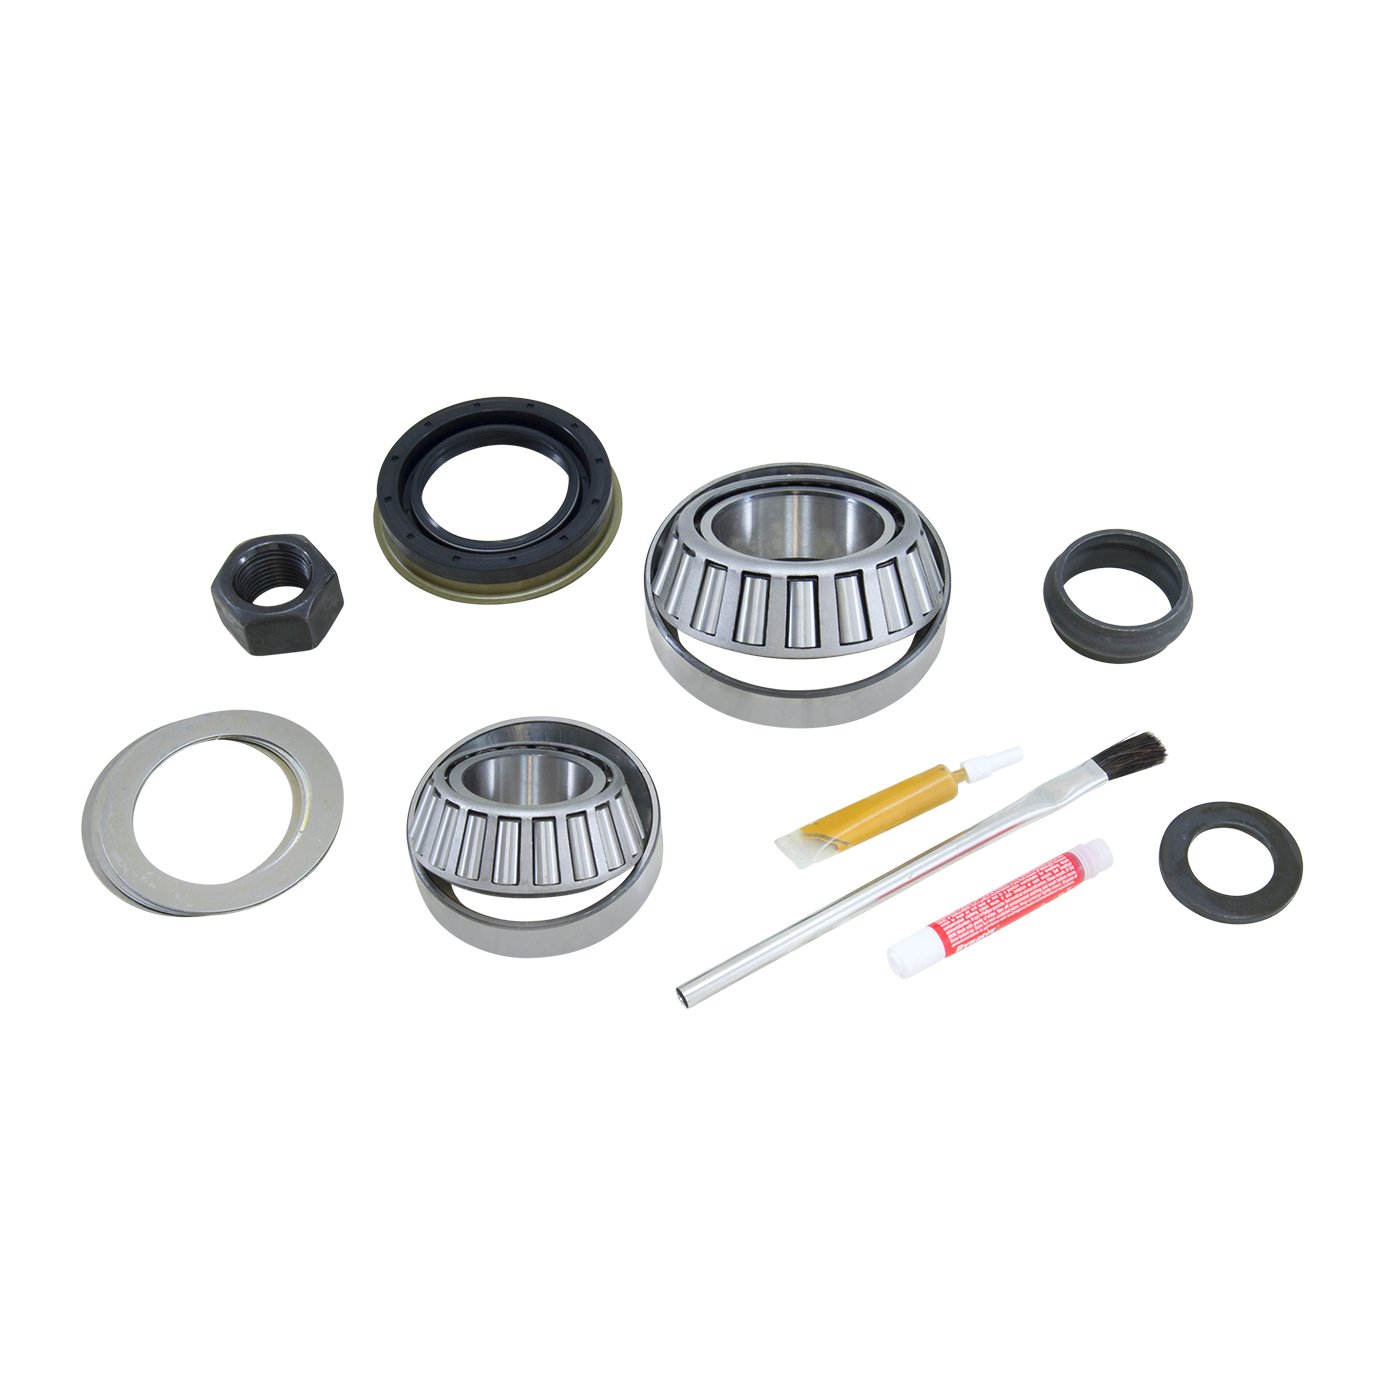 Pinion Install Kit For '92 And Older Dana